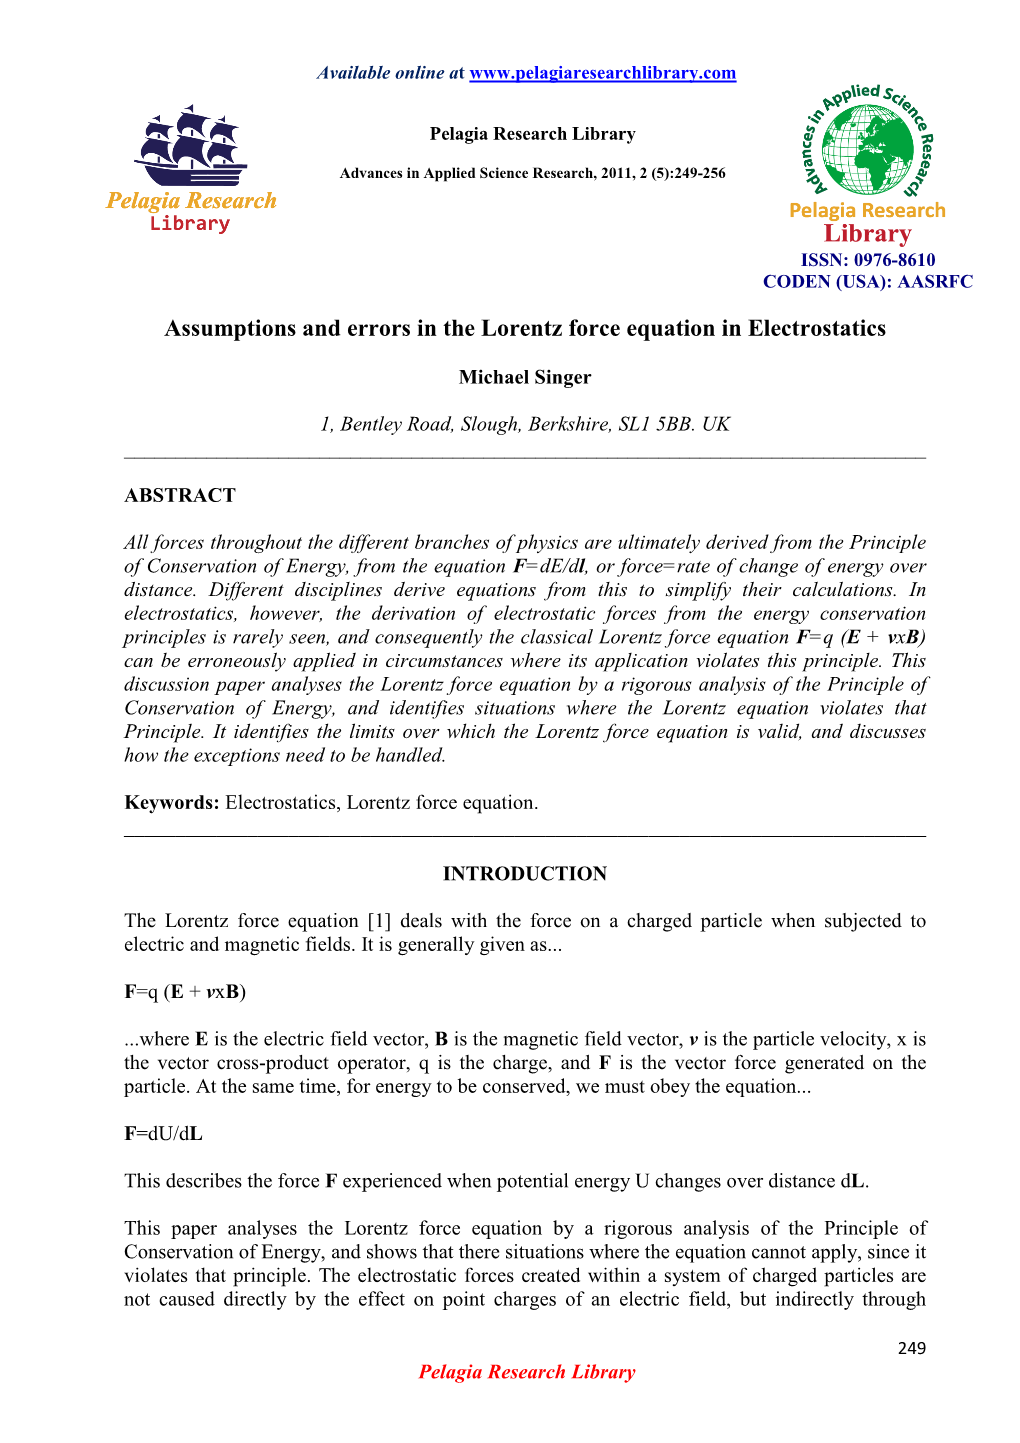 Assumptions and Errors in the Lorentz Force Equation in Electrostatics